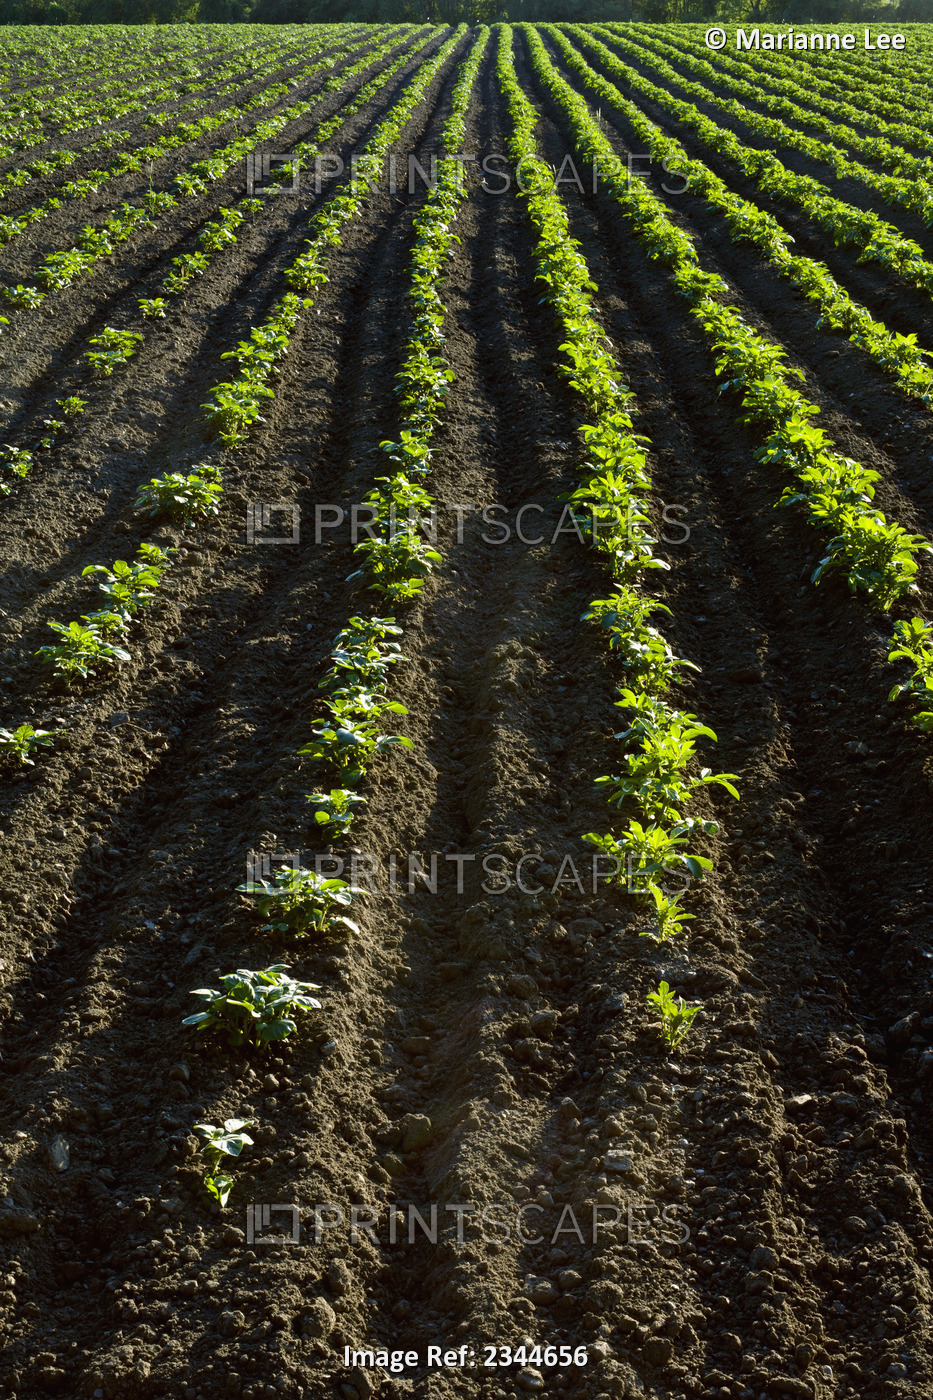 Agriculture - Rows of early growth potato plants in late afternoon light at a ...